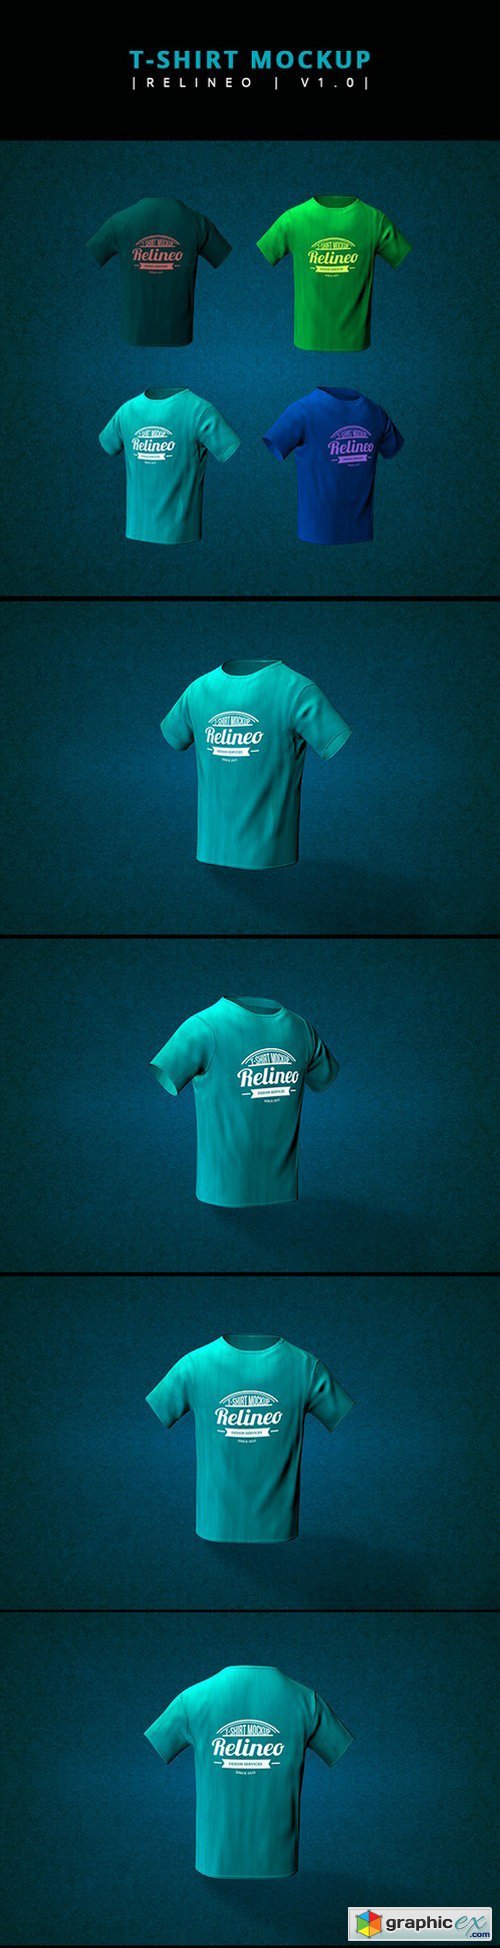 Relineo T-shirt Mock-up Pack